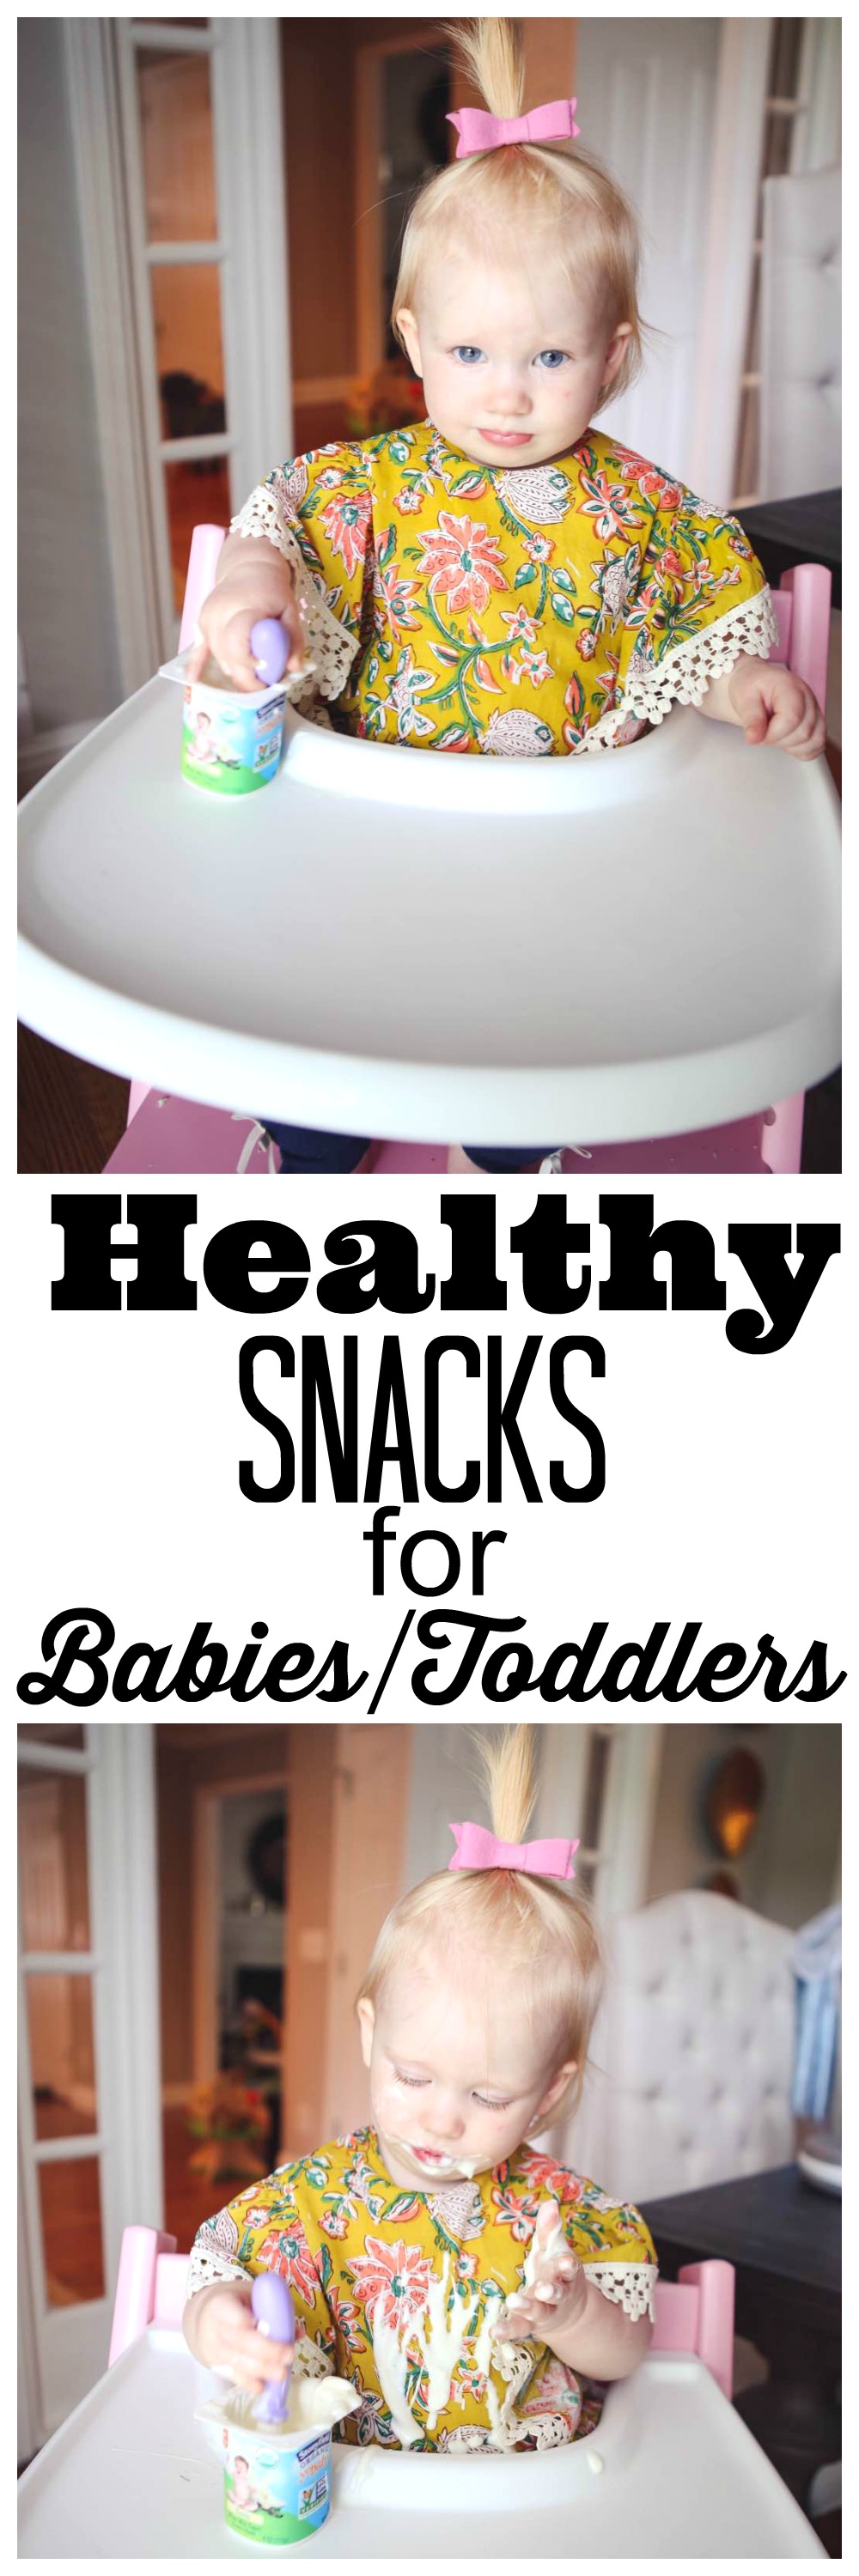 Healthy snacks for babies and toddlers